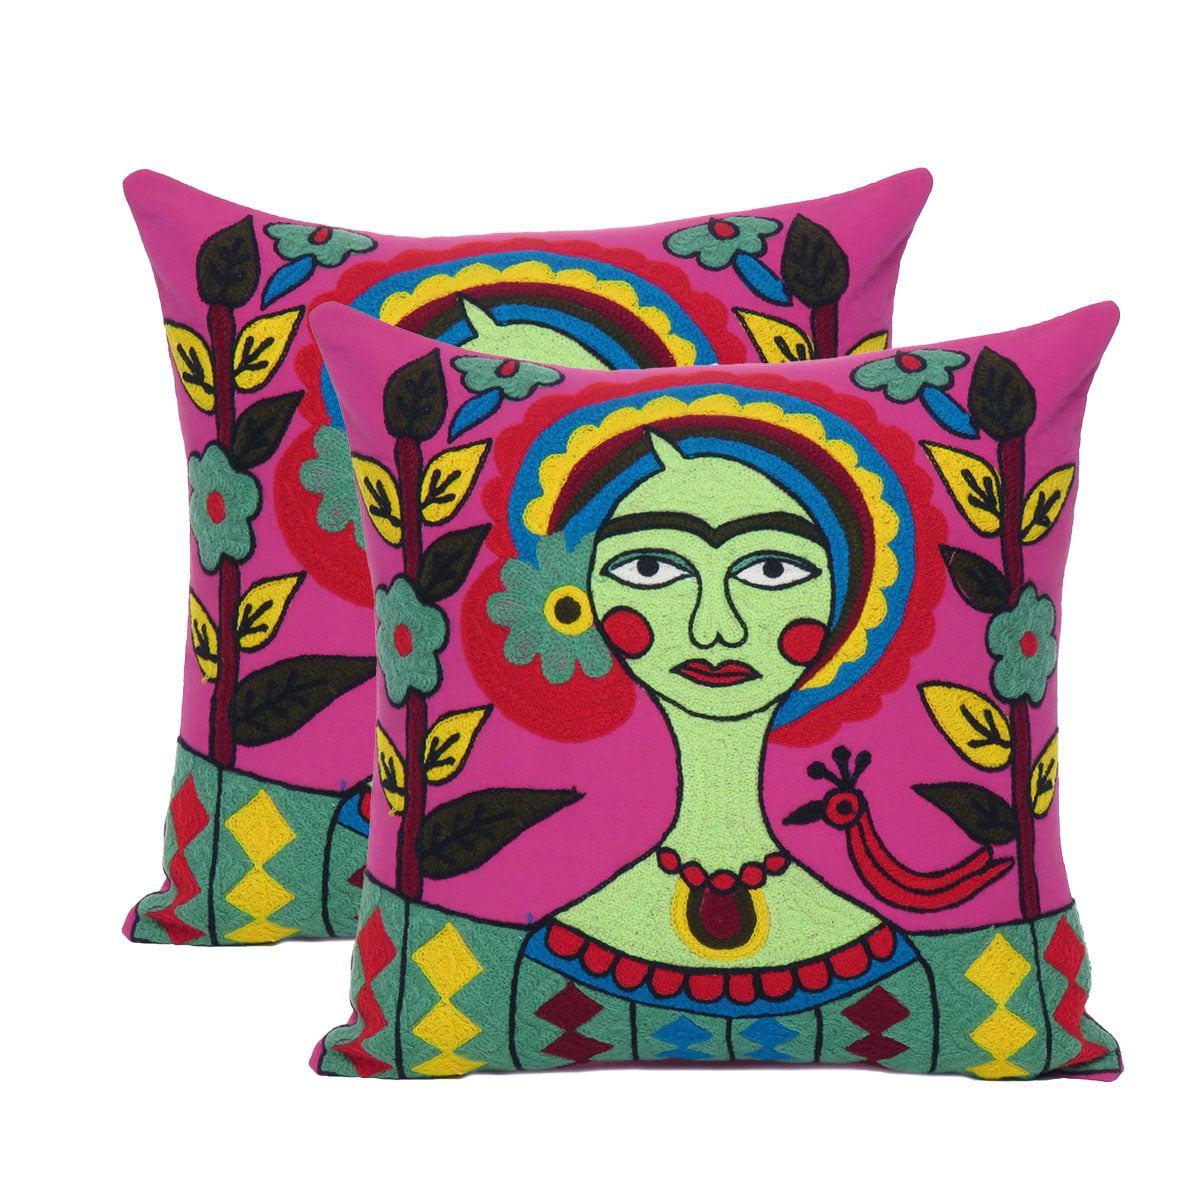 Oussum Cotton Frida Kahlo Square Cushion Covers Size 18 Inches Set of 2 ...